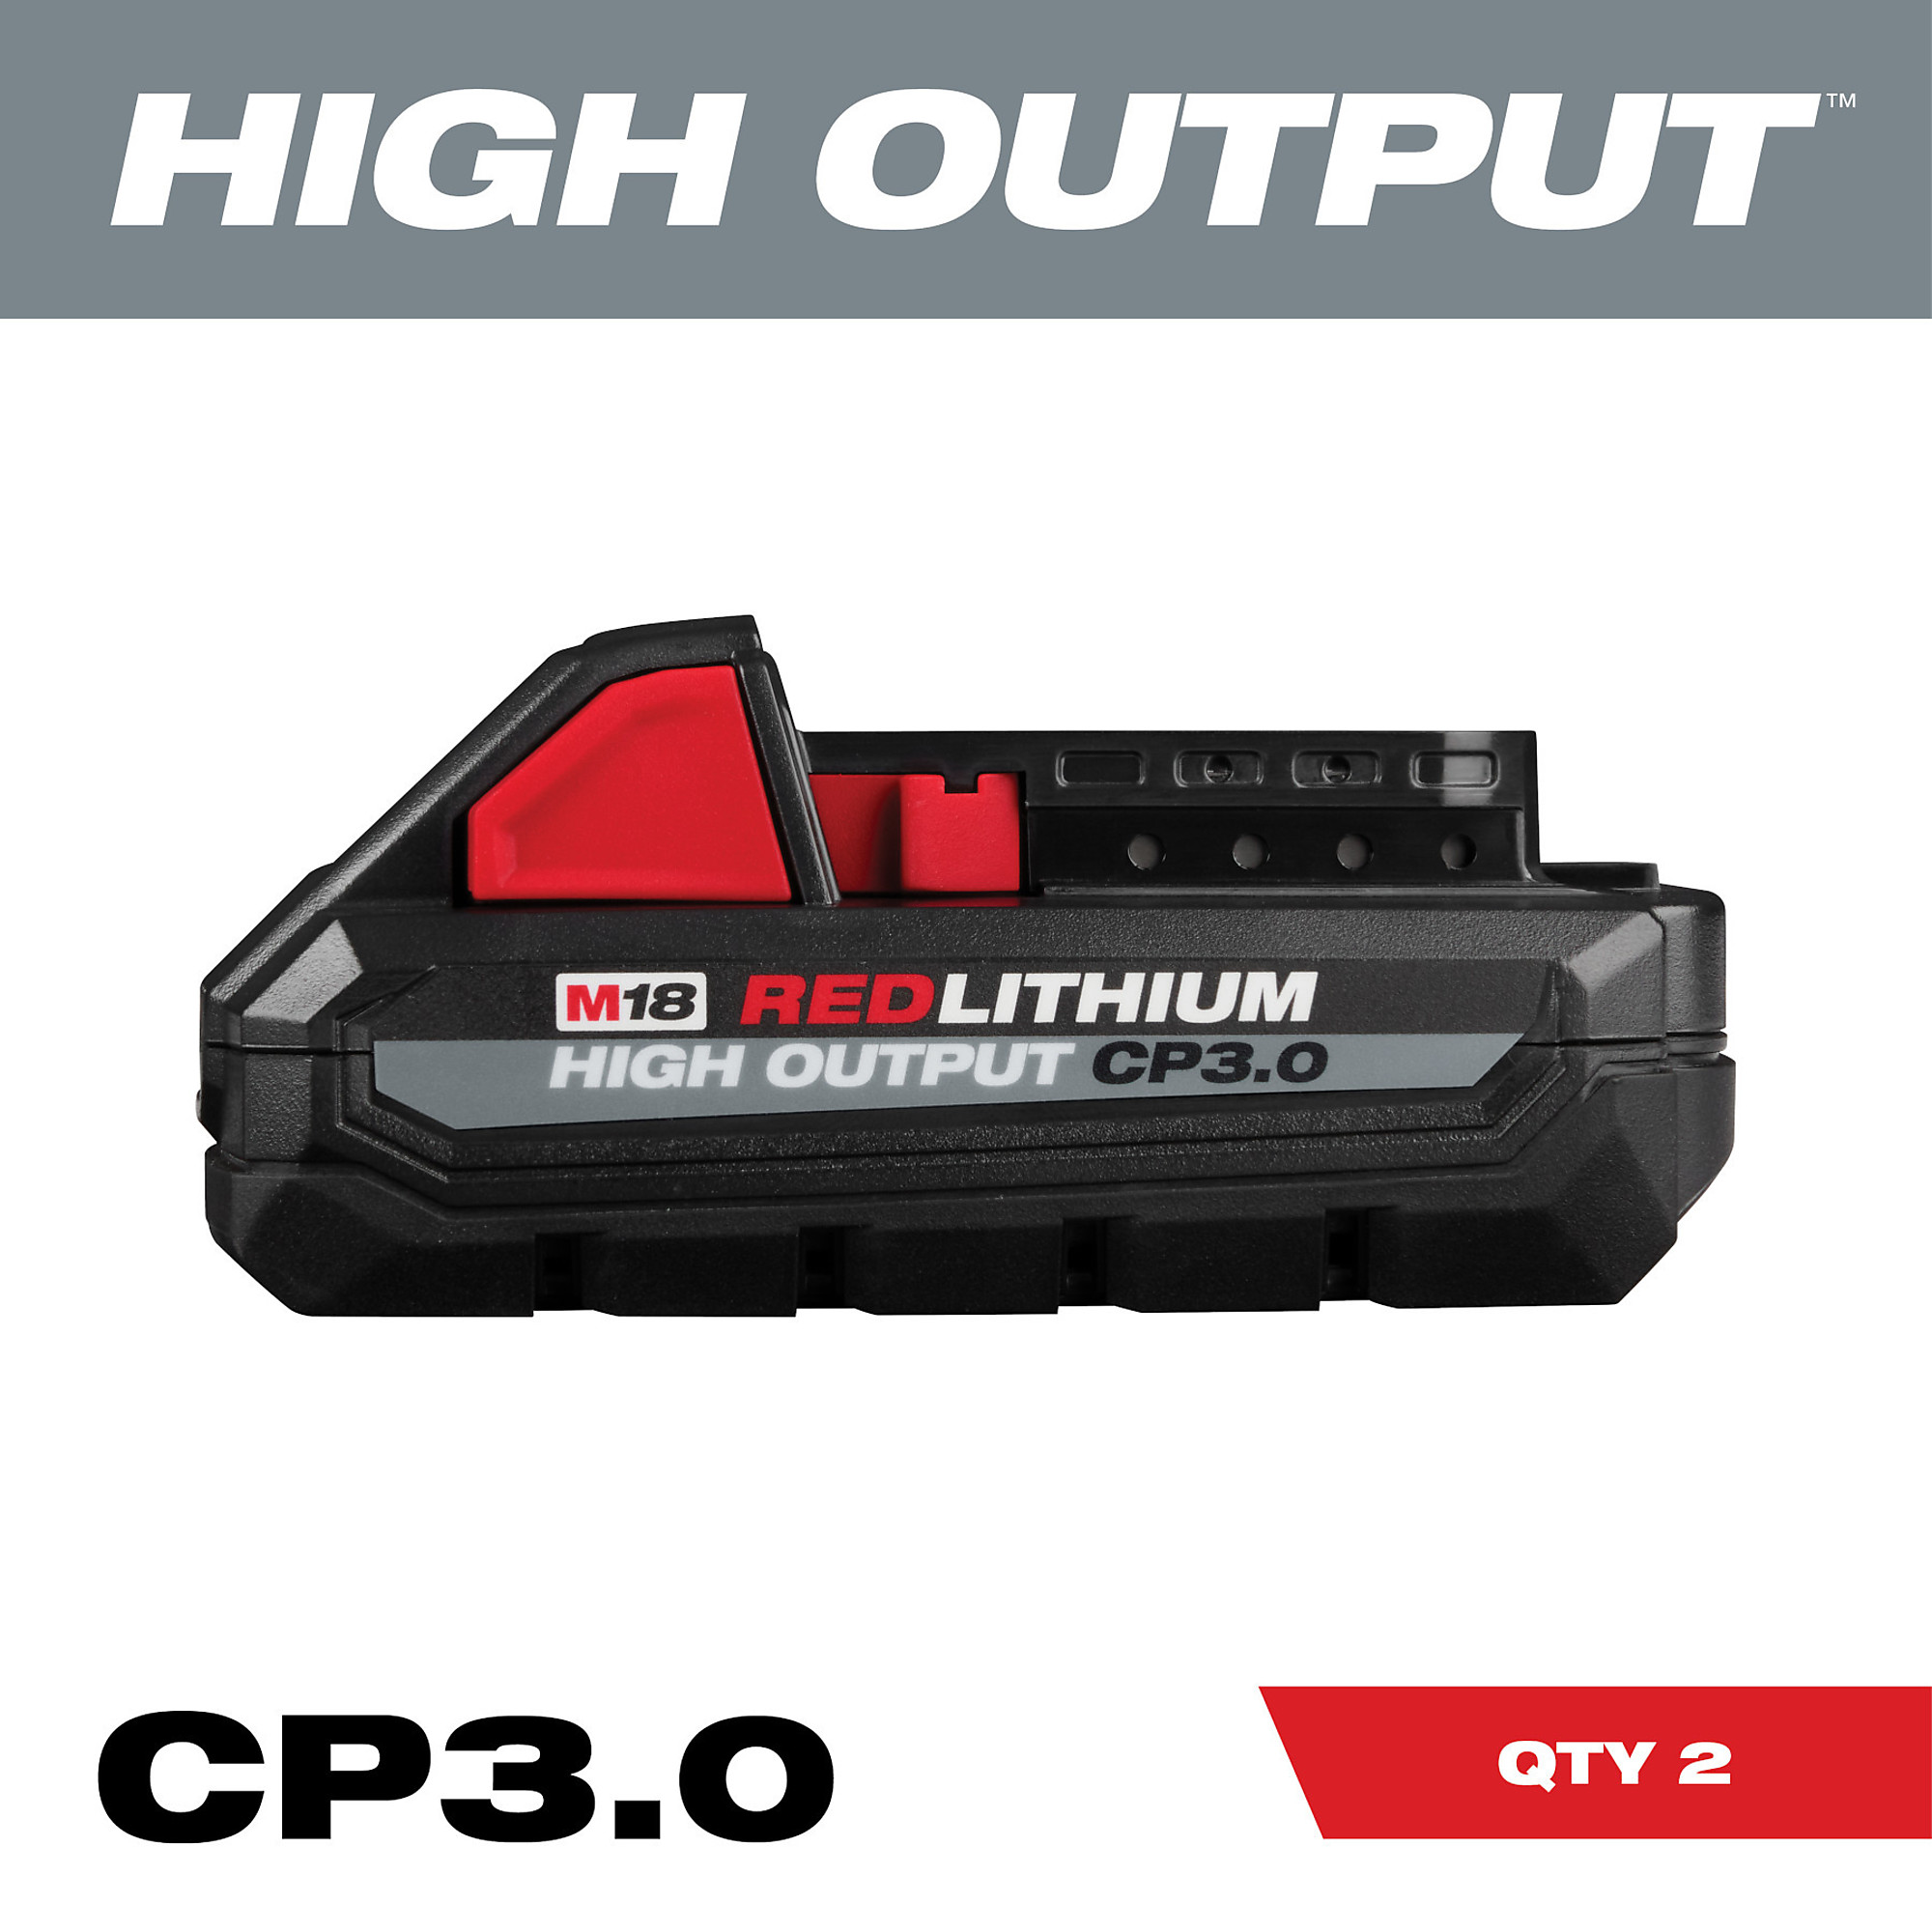 Milwaukee M18 REDLITHIUM High Output CP3.0 Battery Pack, 2-Pack, Model 48-11-1837